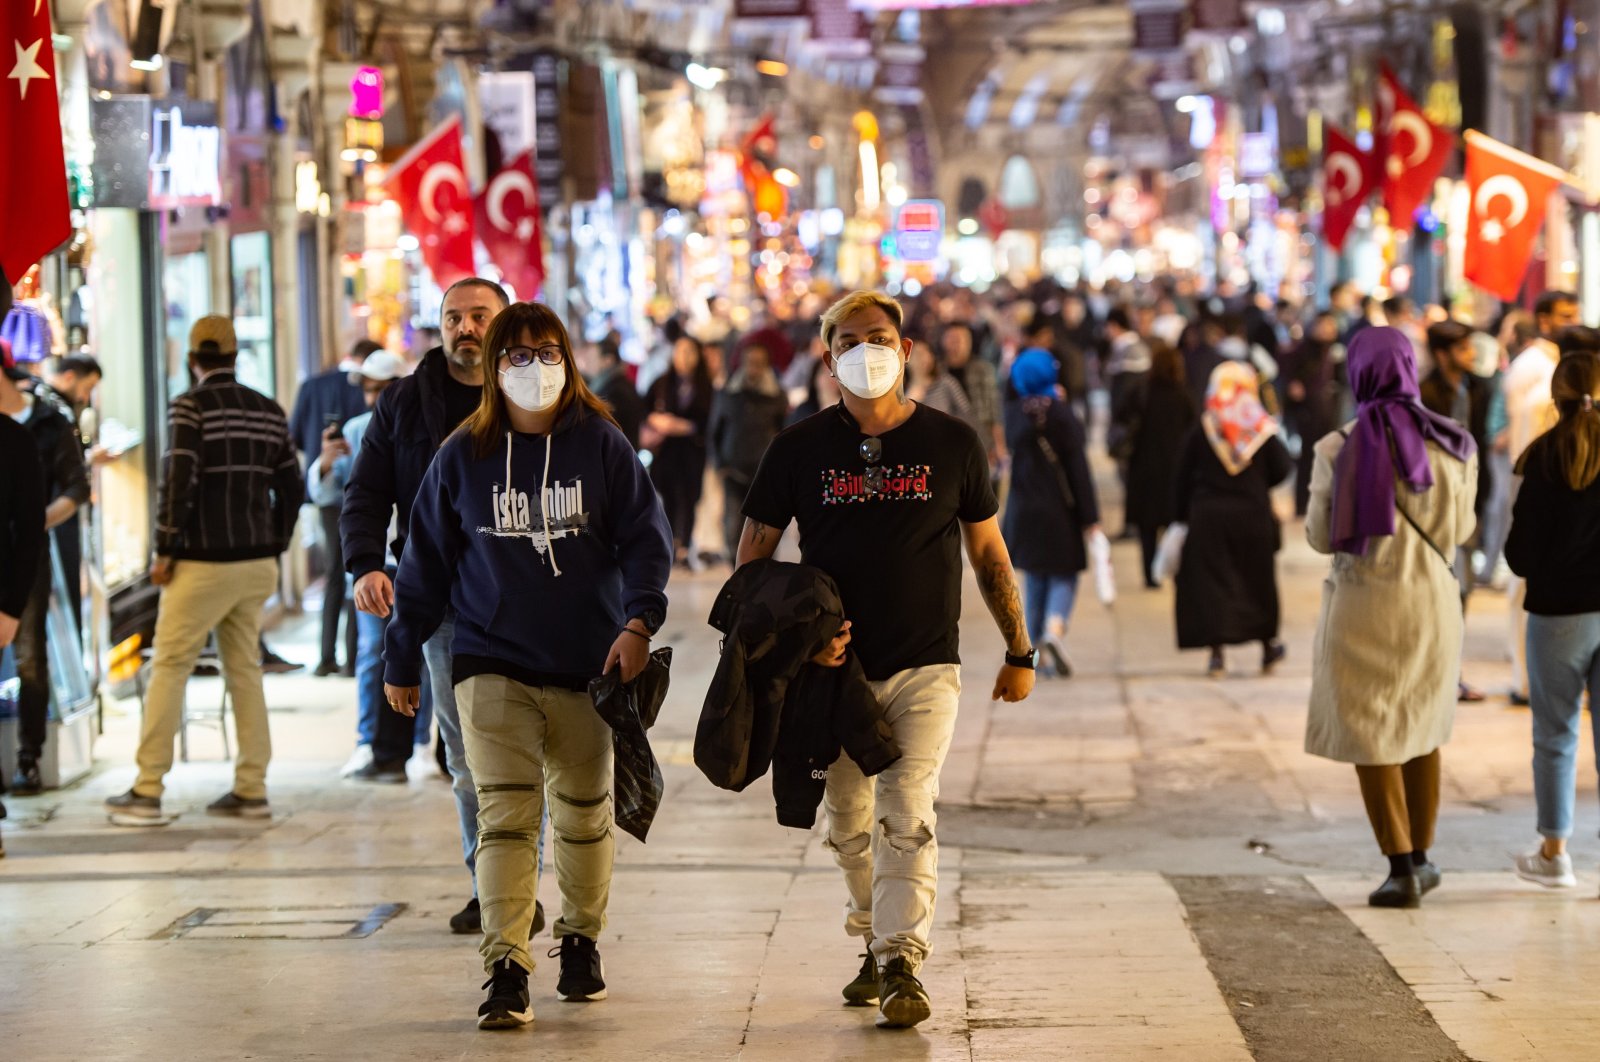 A woman and a man wearing face masks walk in Istanbul's historic Grand Bazaar, one of the city's main tourist attractions, March 13, 2020. (AFP Photo)